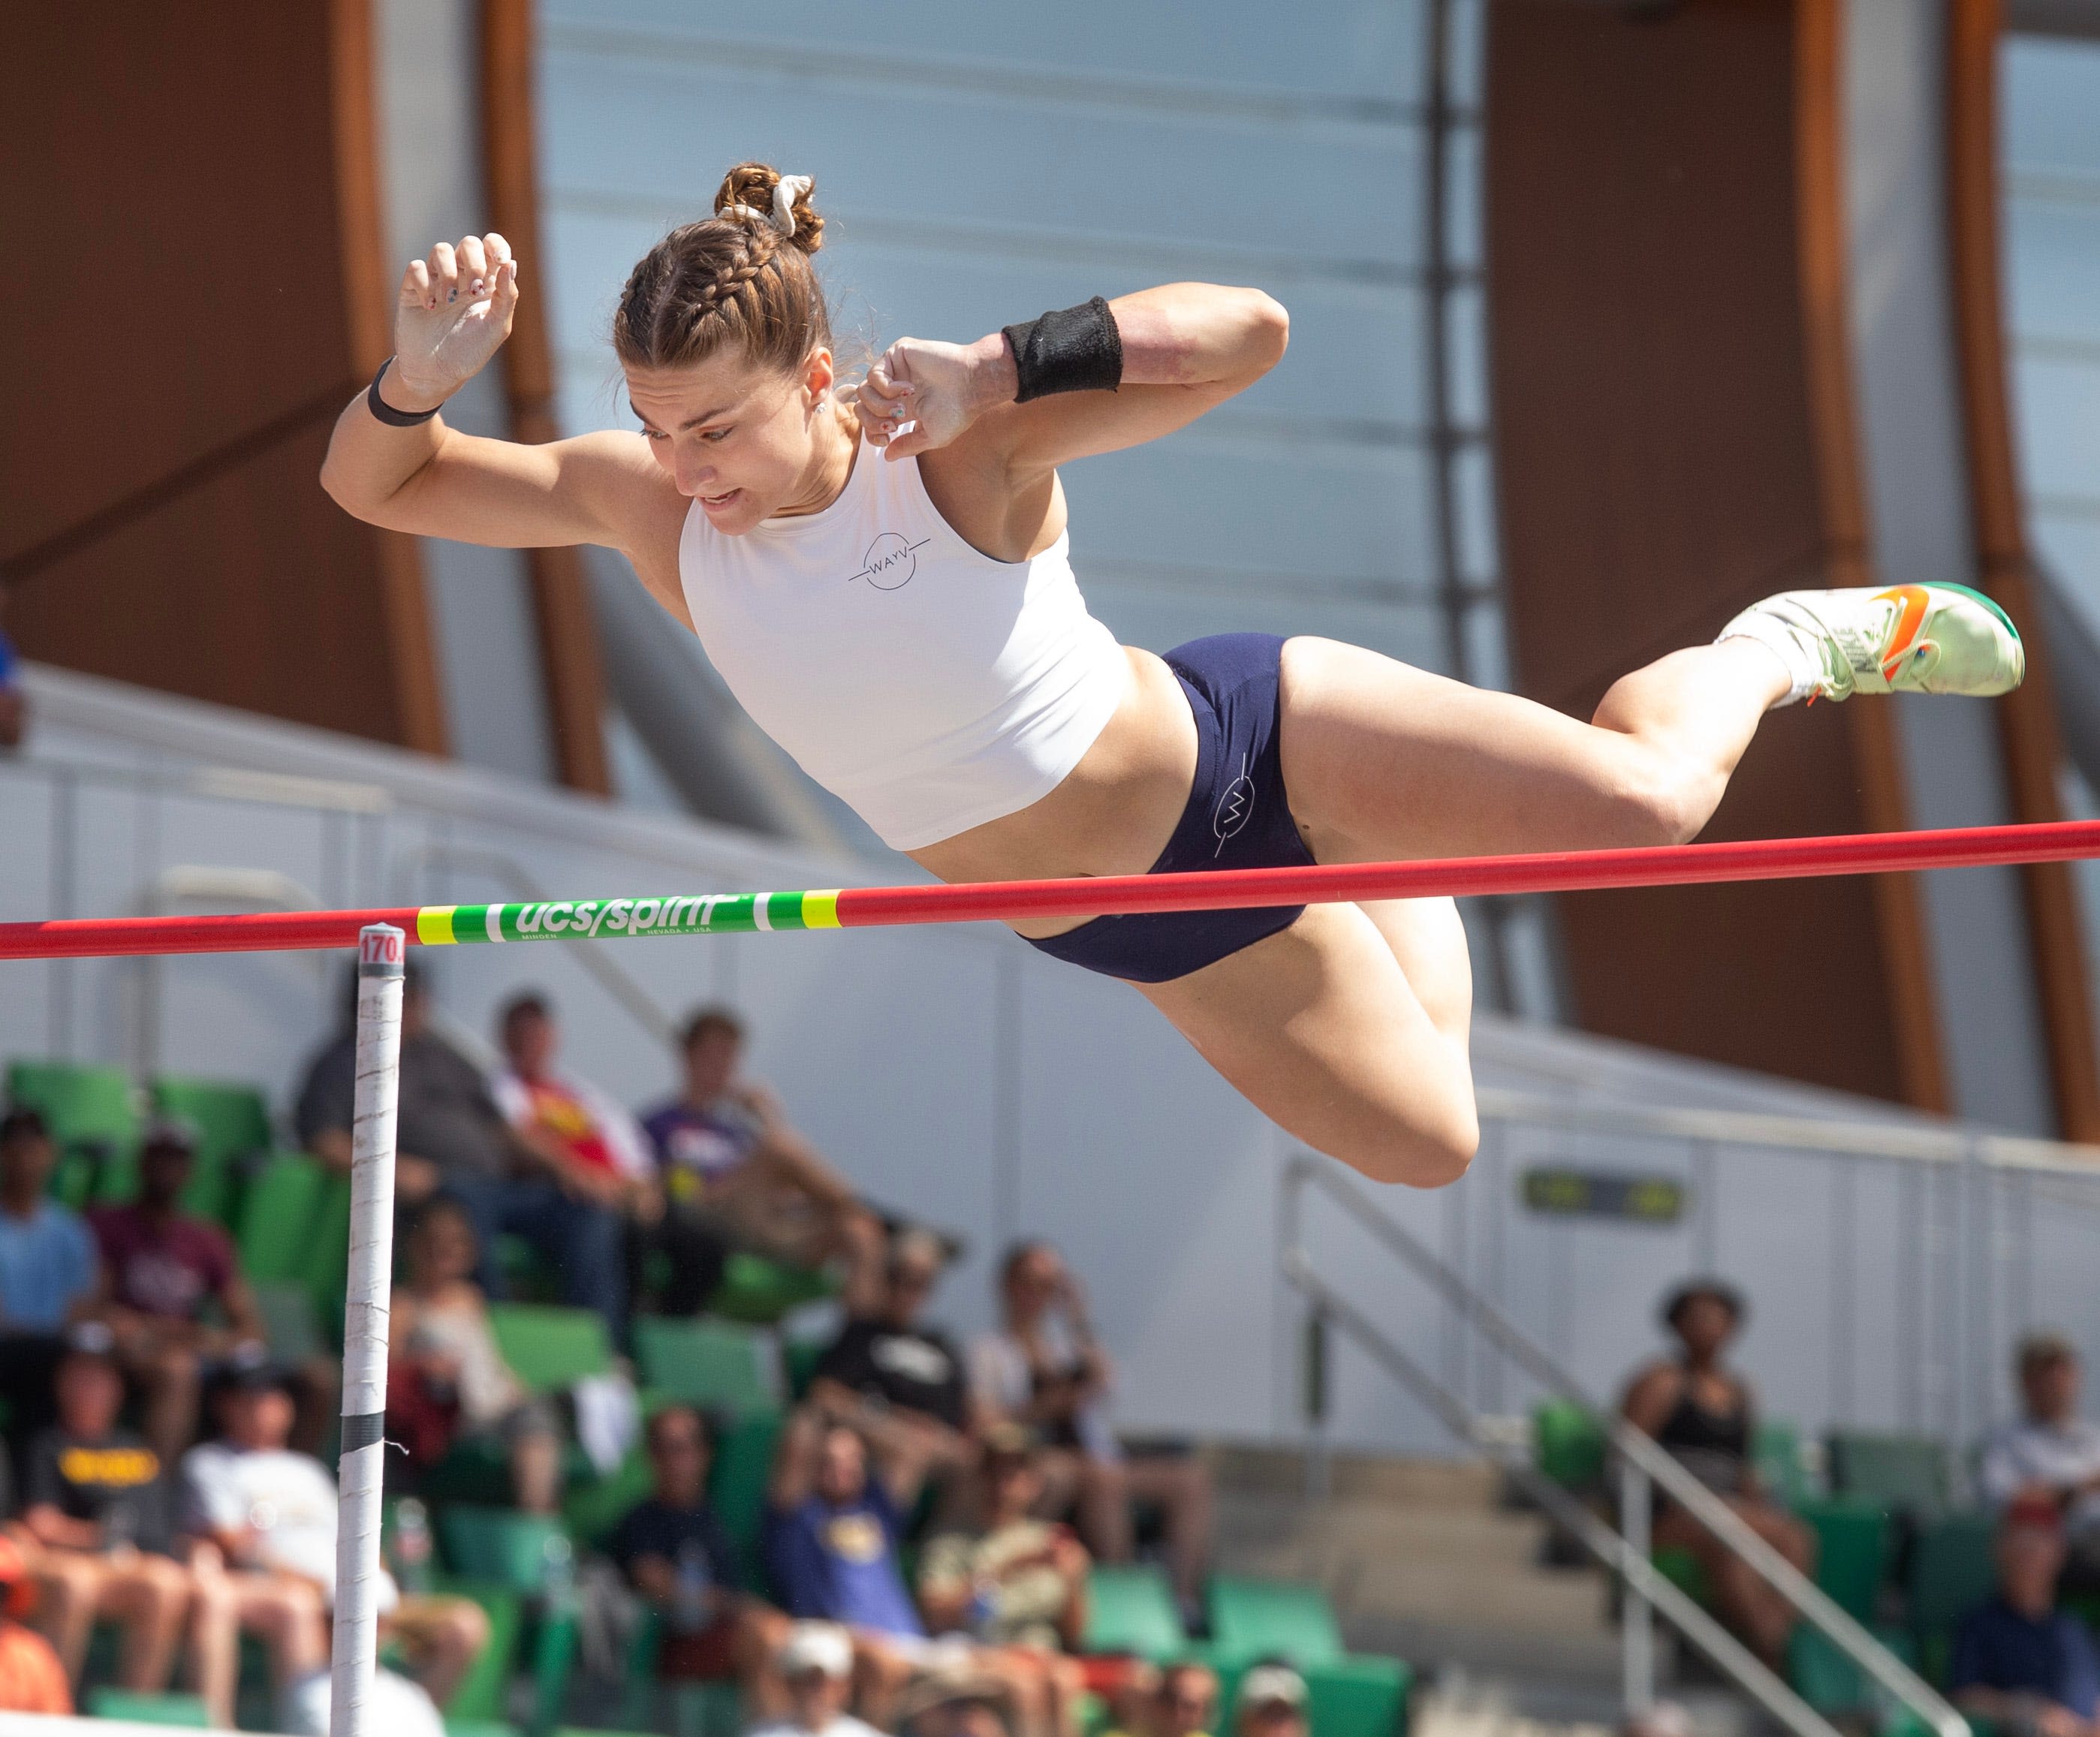 Bridget Williams shatters form charts to capture pole vault title at U.S. Olympic Trials